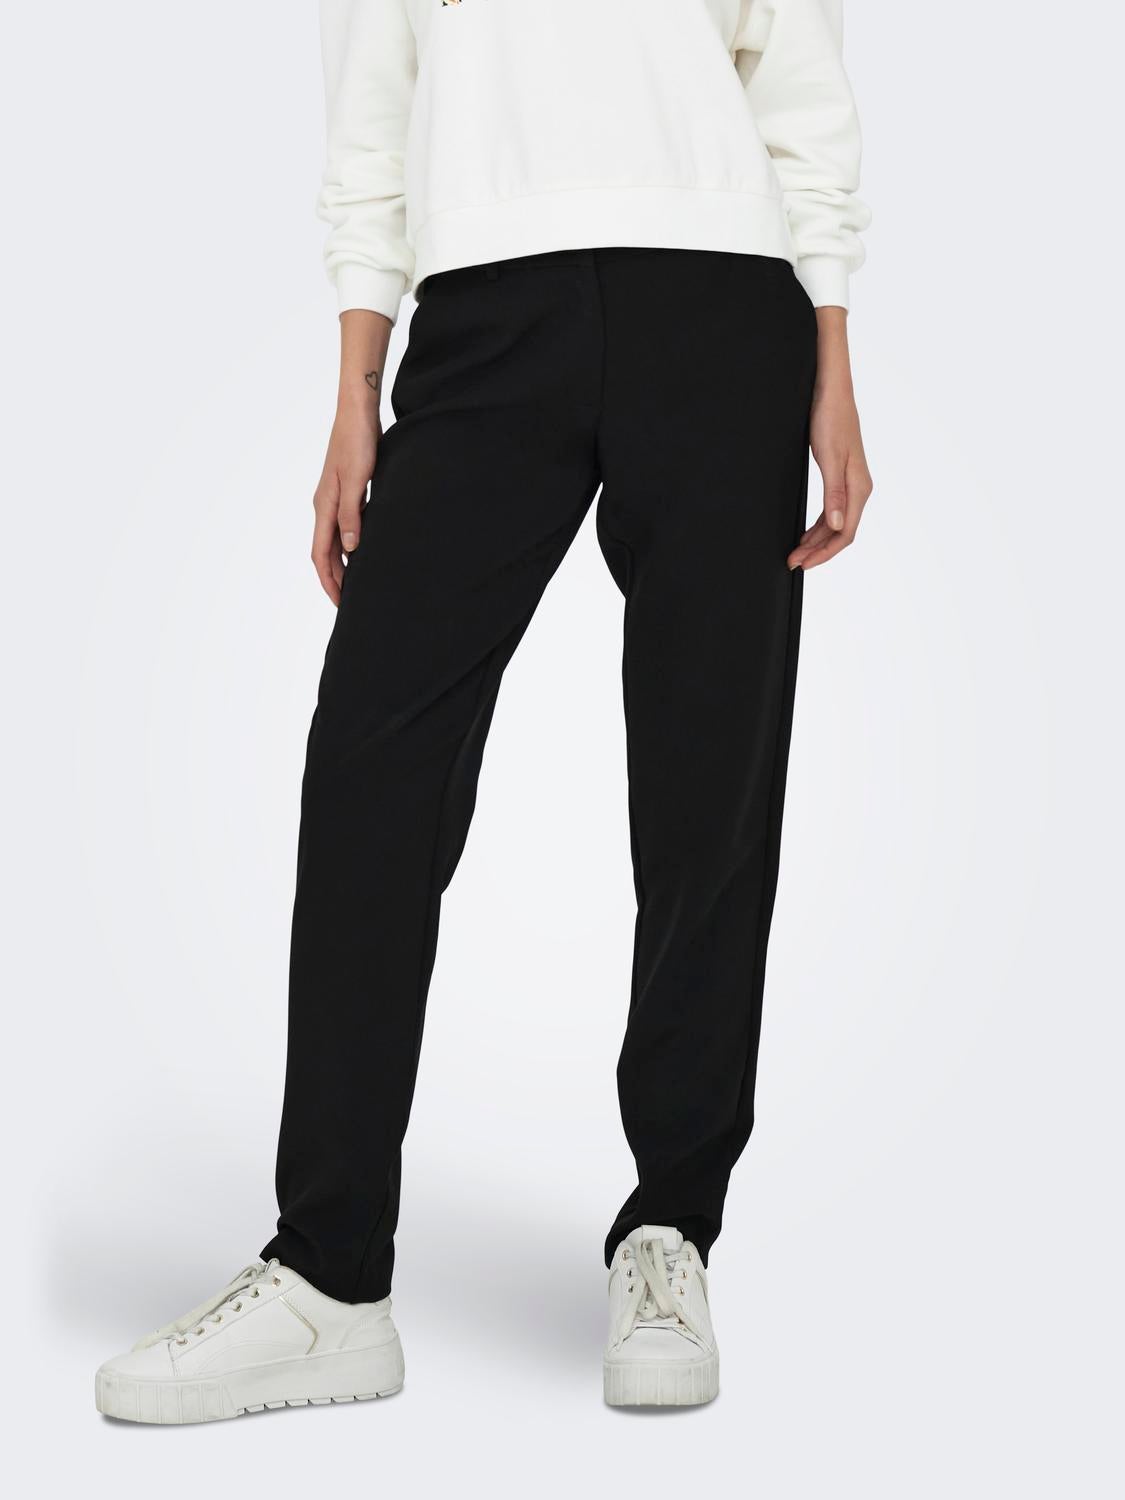 Has anyone tried the Venderby's tall trousers? Are they actually tall? :  r/TallGirls